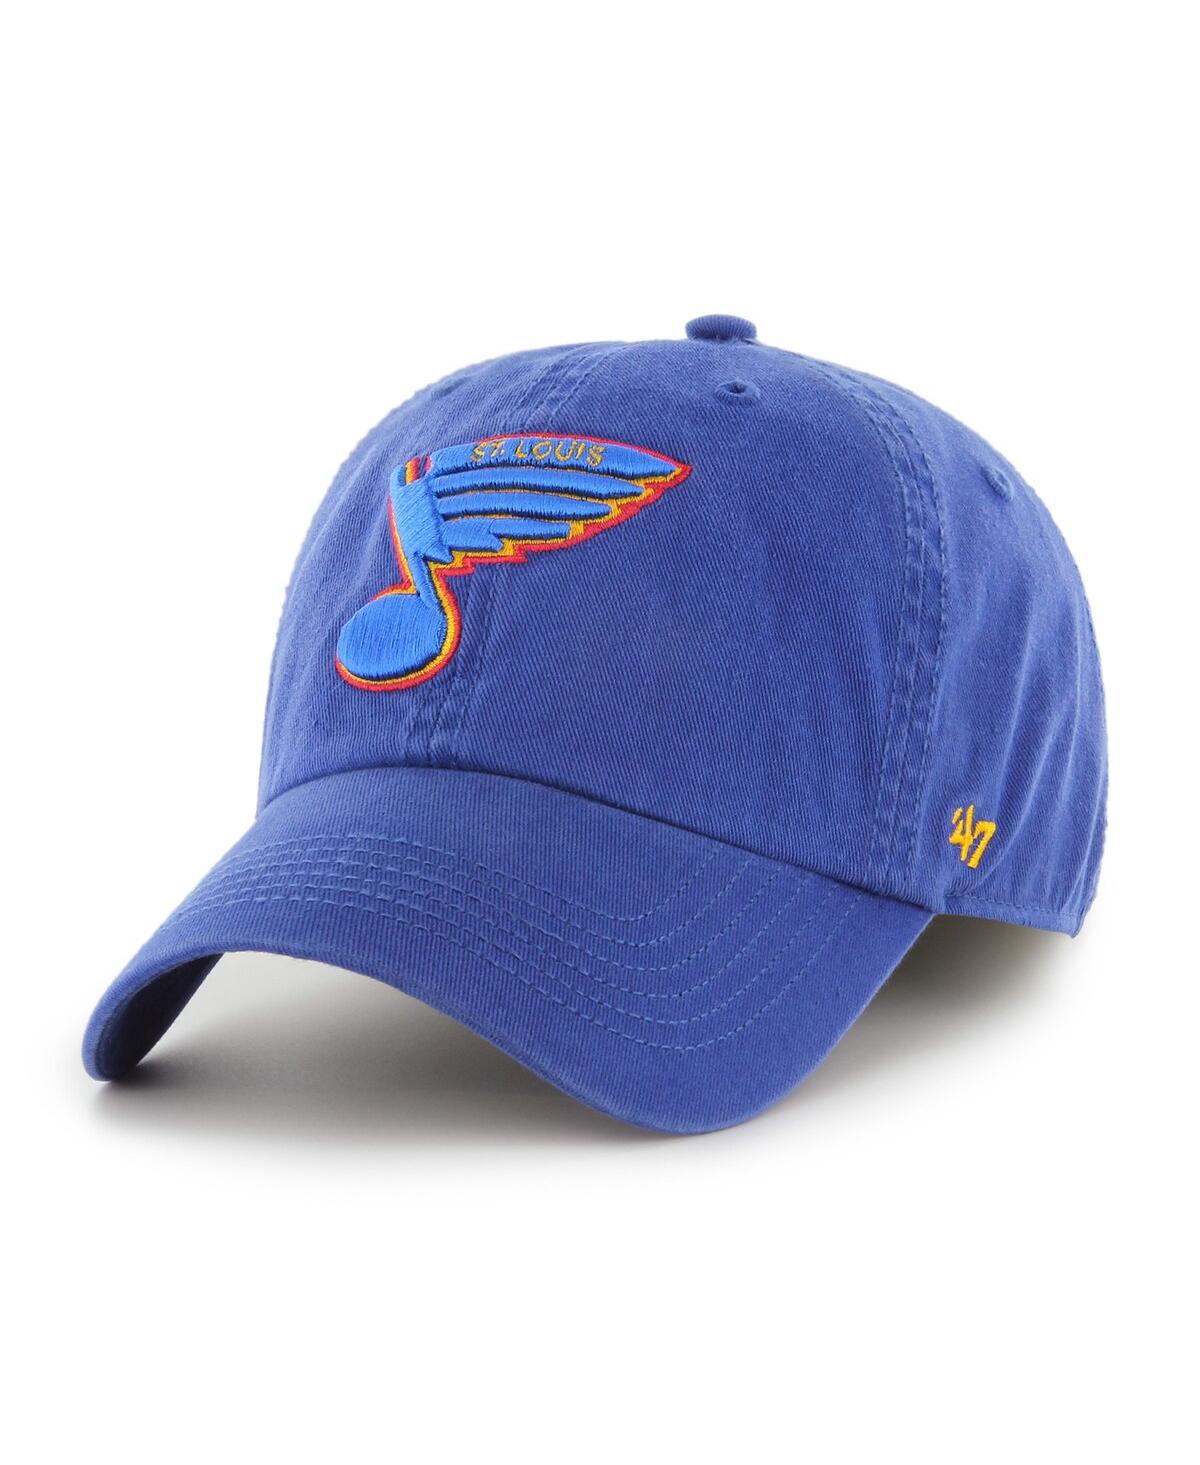 47 Brand Men's ' Blue Distressed St. Louis Blues Vintage-like Classic Franchise Fitted Hat